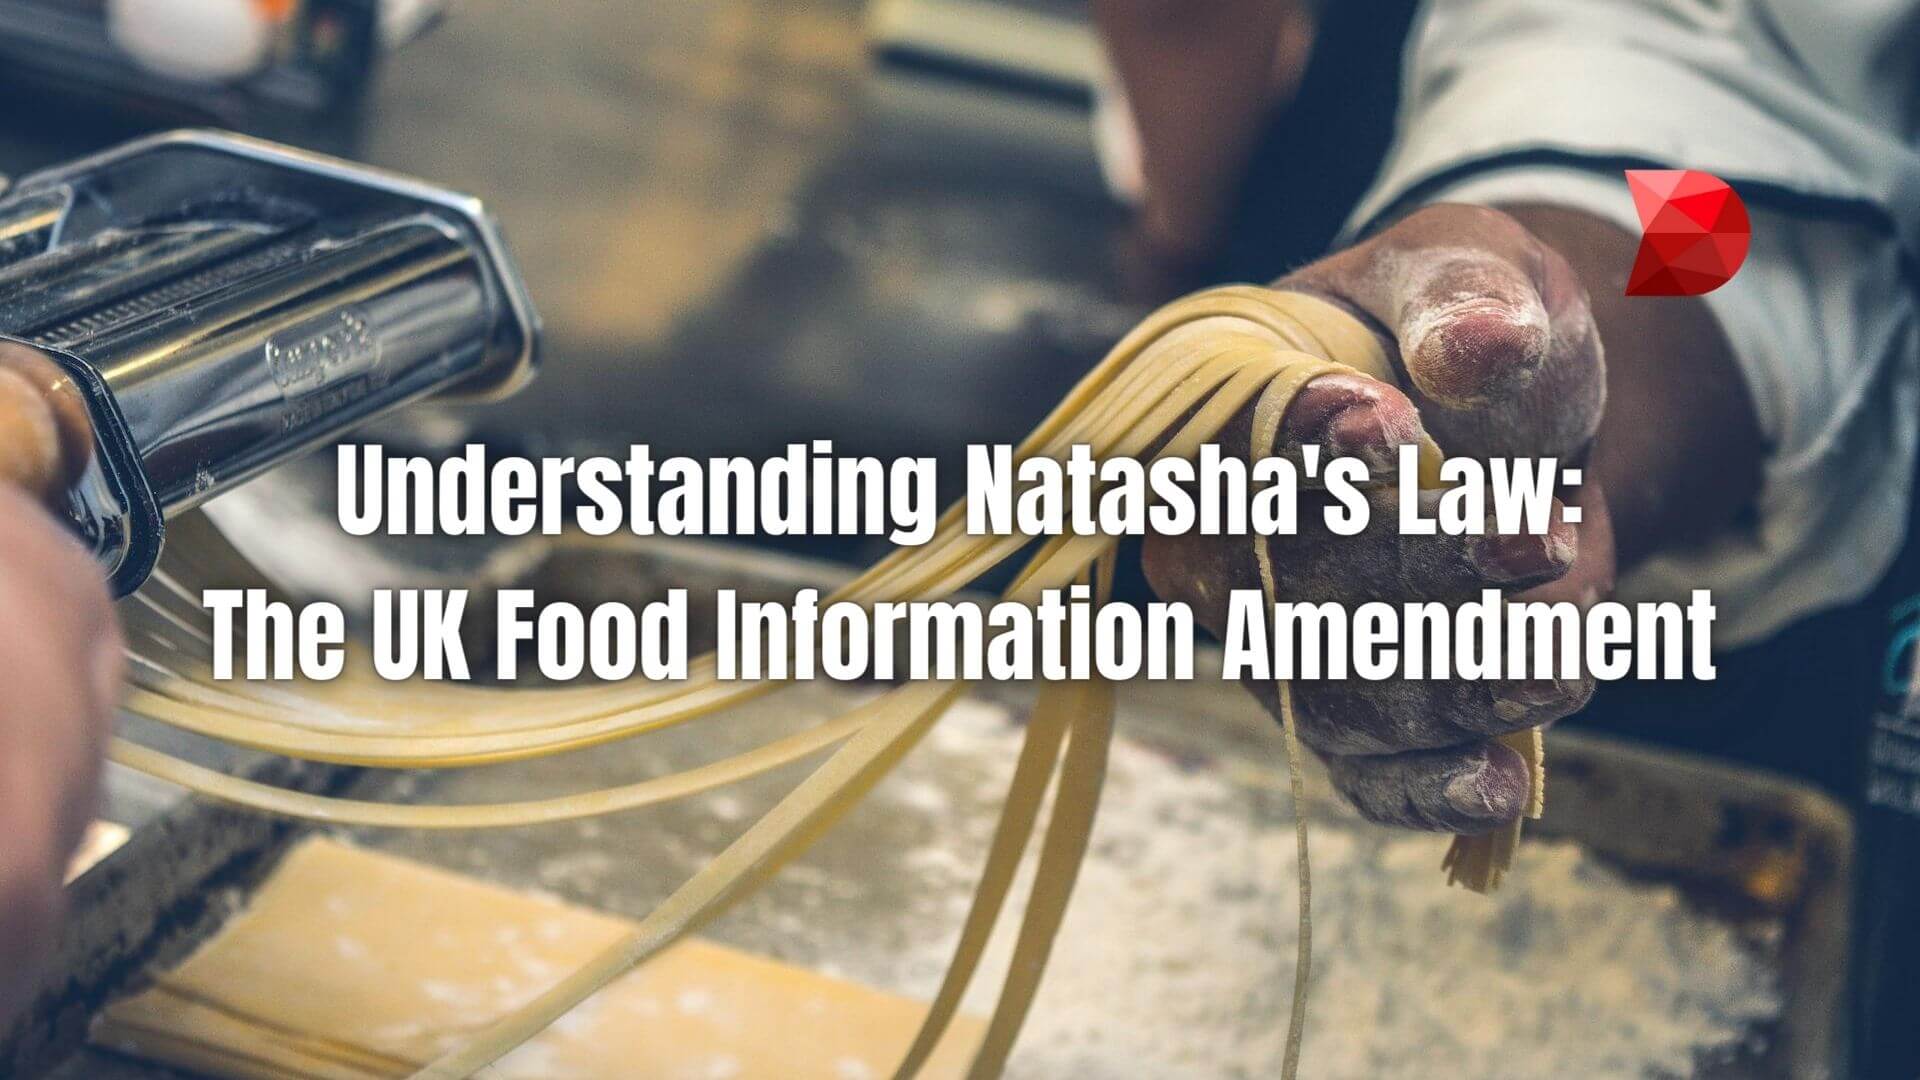 Unlock compliance with Natasha's Law! Discover our guide to navigating the UK Food Information Amendment for safe food labeling.